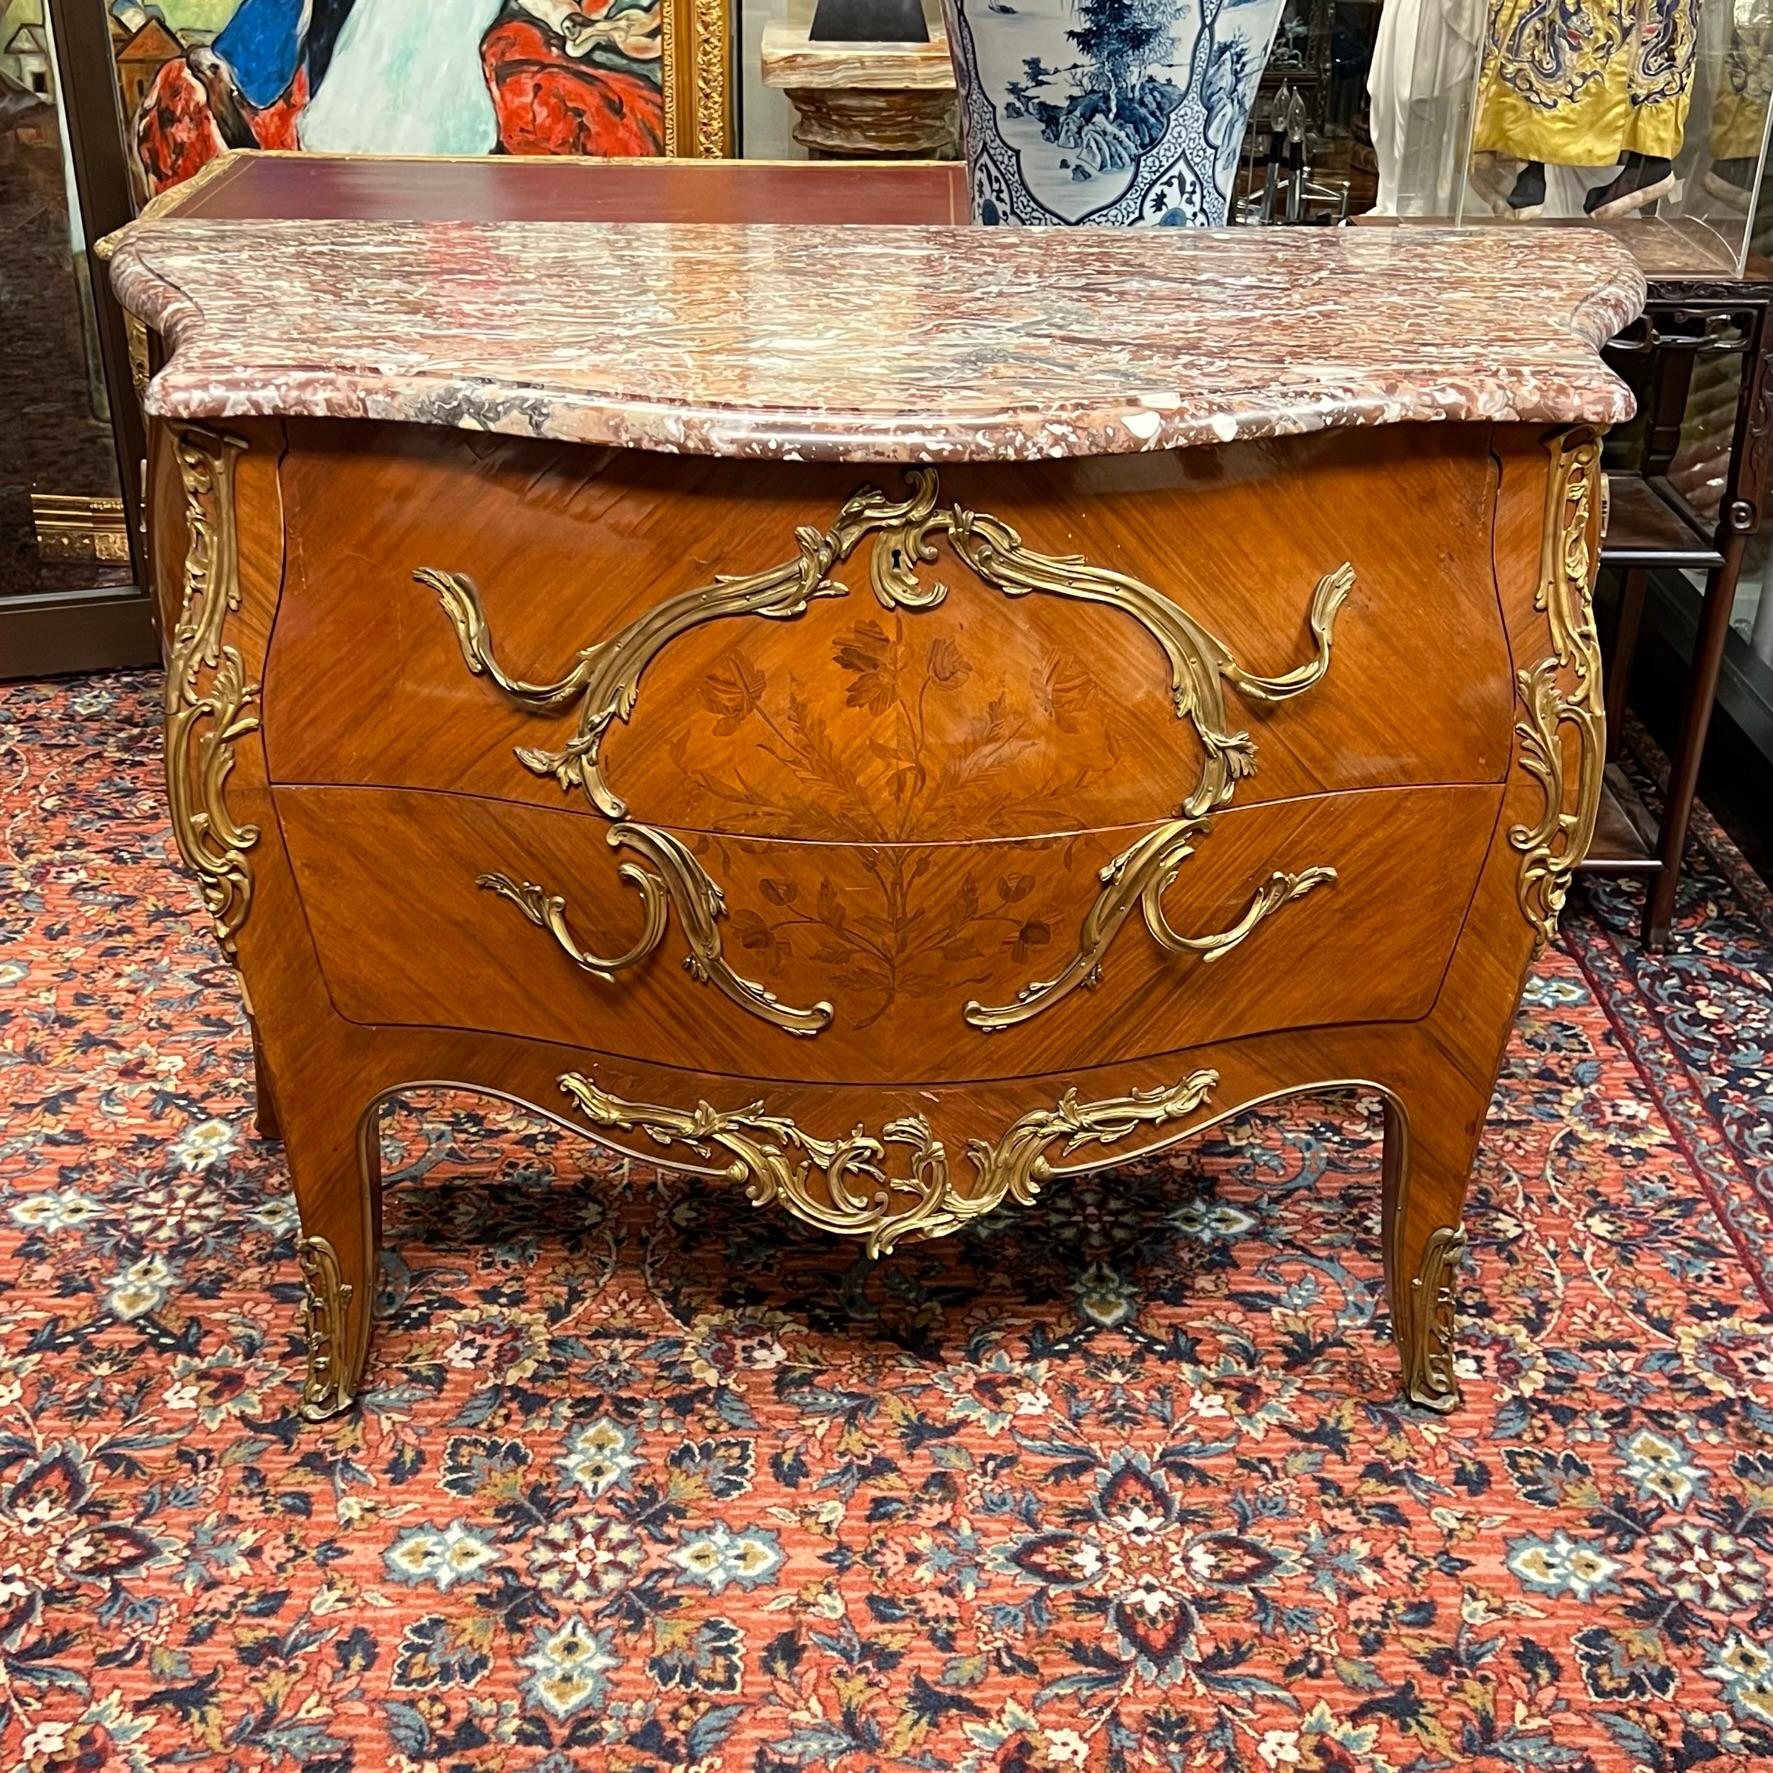 Exceptional antique (late 19th century) French commode in the Louis XV style with fine floral marquetry inlay and gilt bronze mounts.